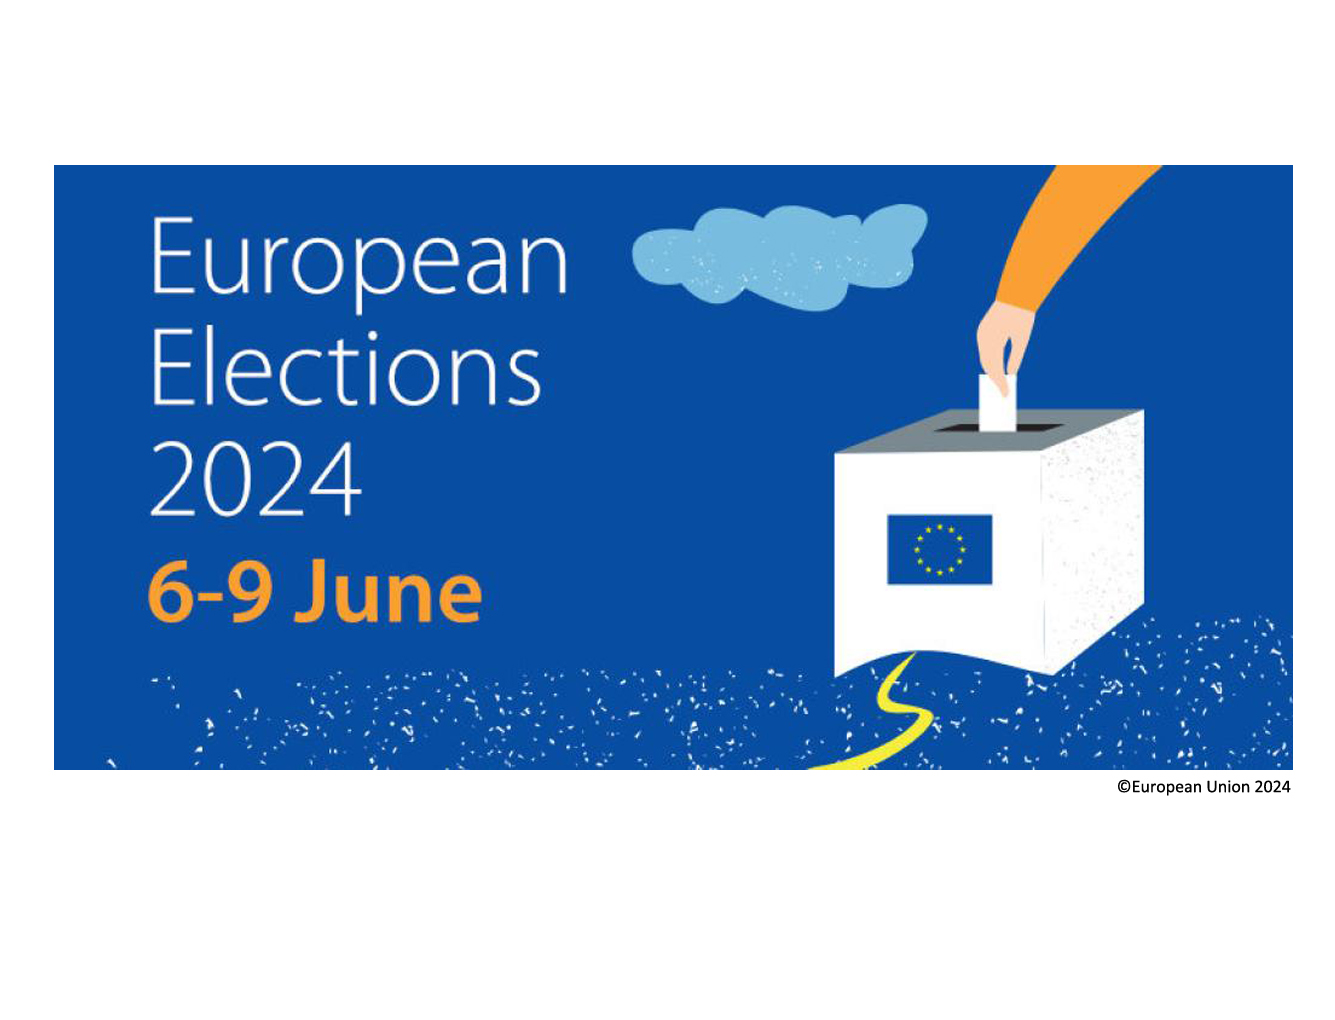 European Elections: EU Citizens Living Abroad How to Vote June 6-9, 2024